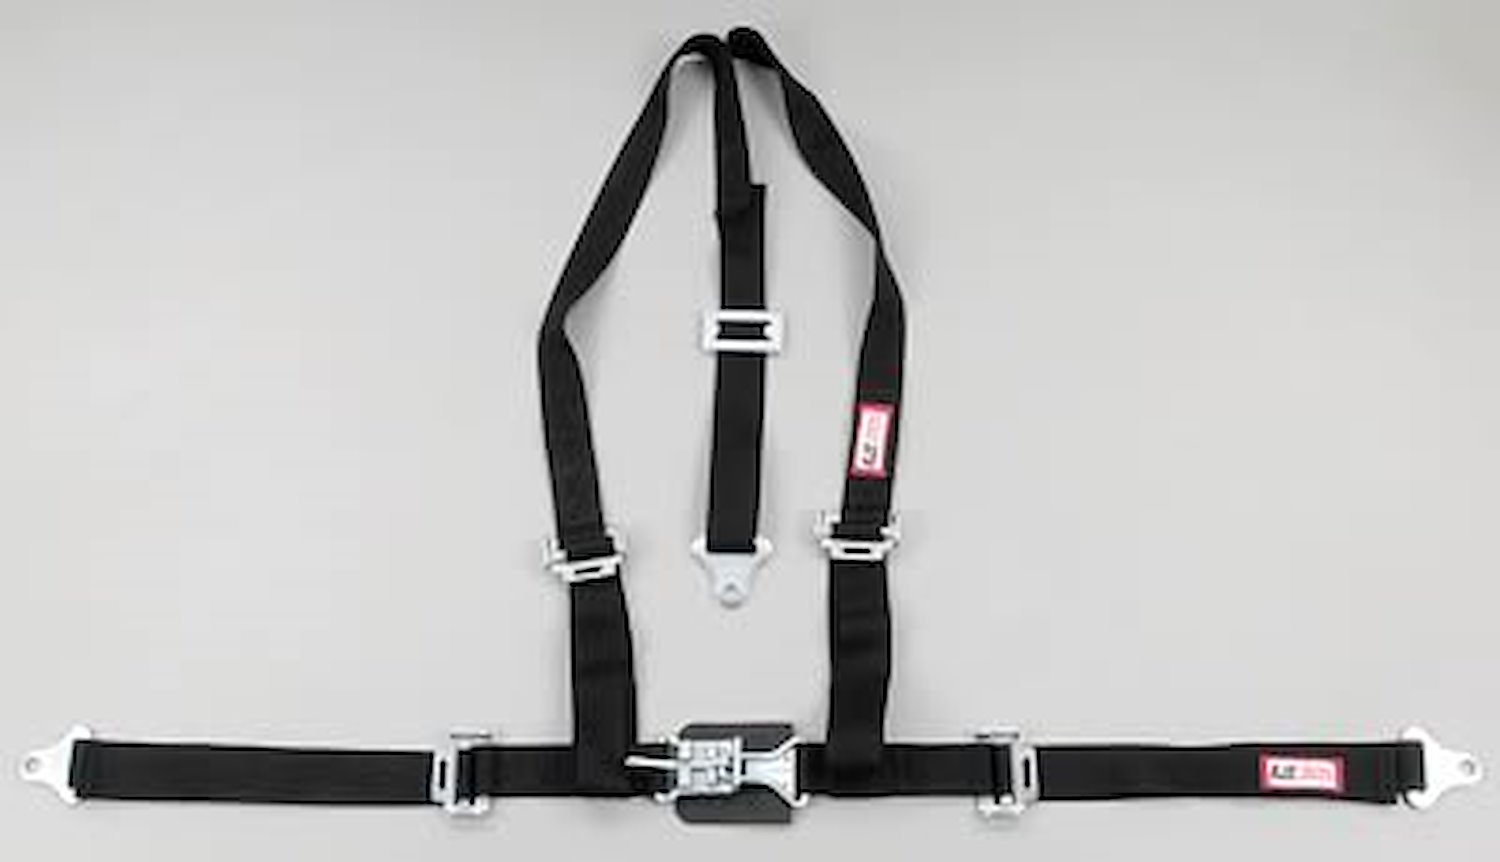 NON-SFI L&L HARNESS 2 PULL DOWN Lap Belt SEWN IN 2 S.H. Y FLOOR Mount ALL WRAP ENDS PURPLE